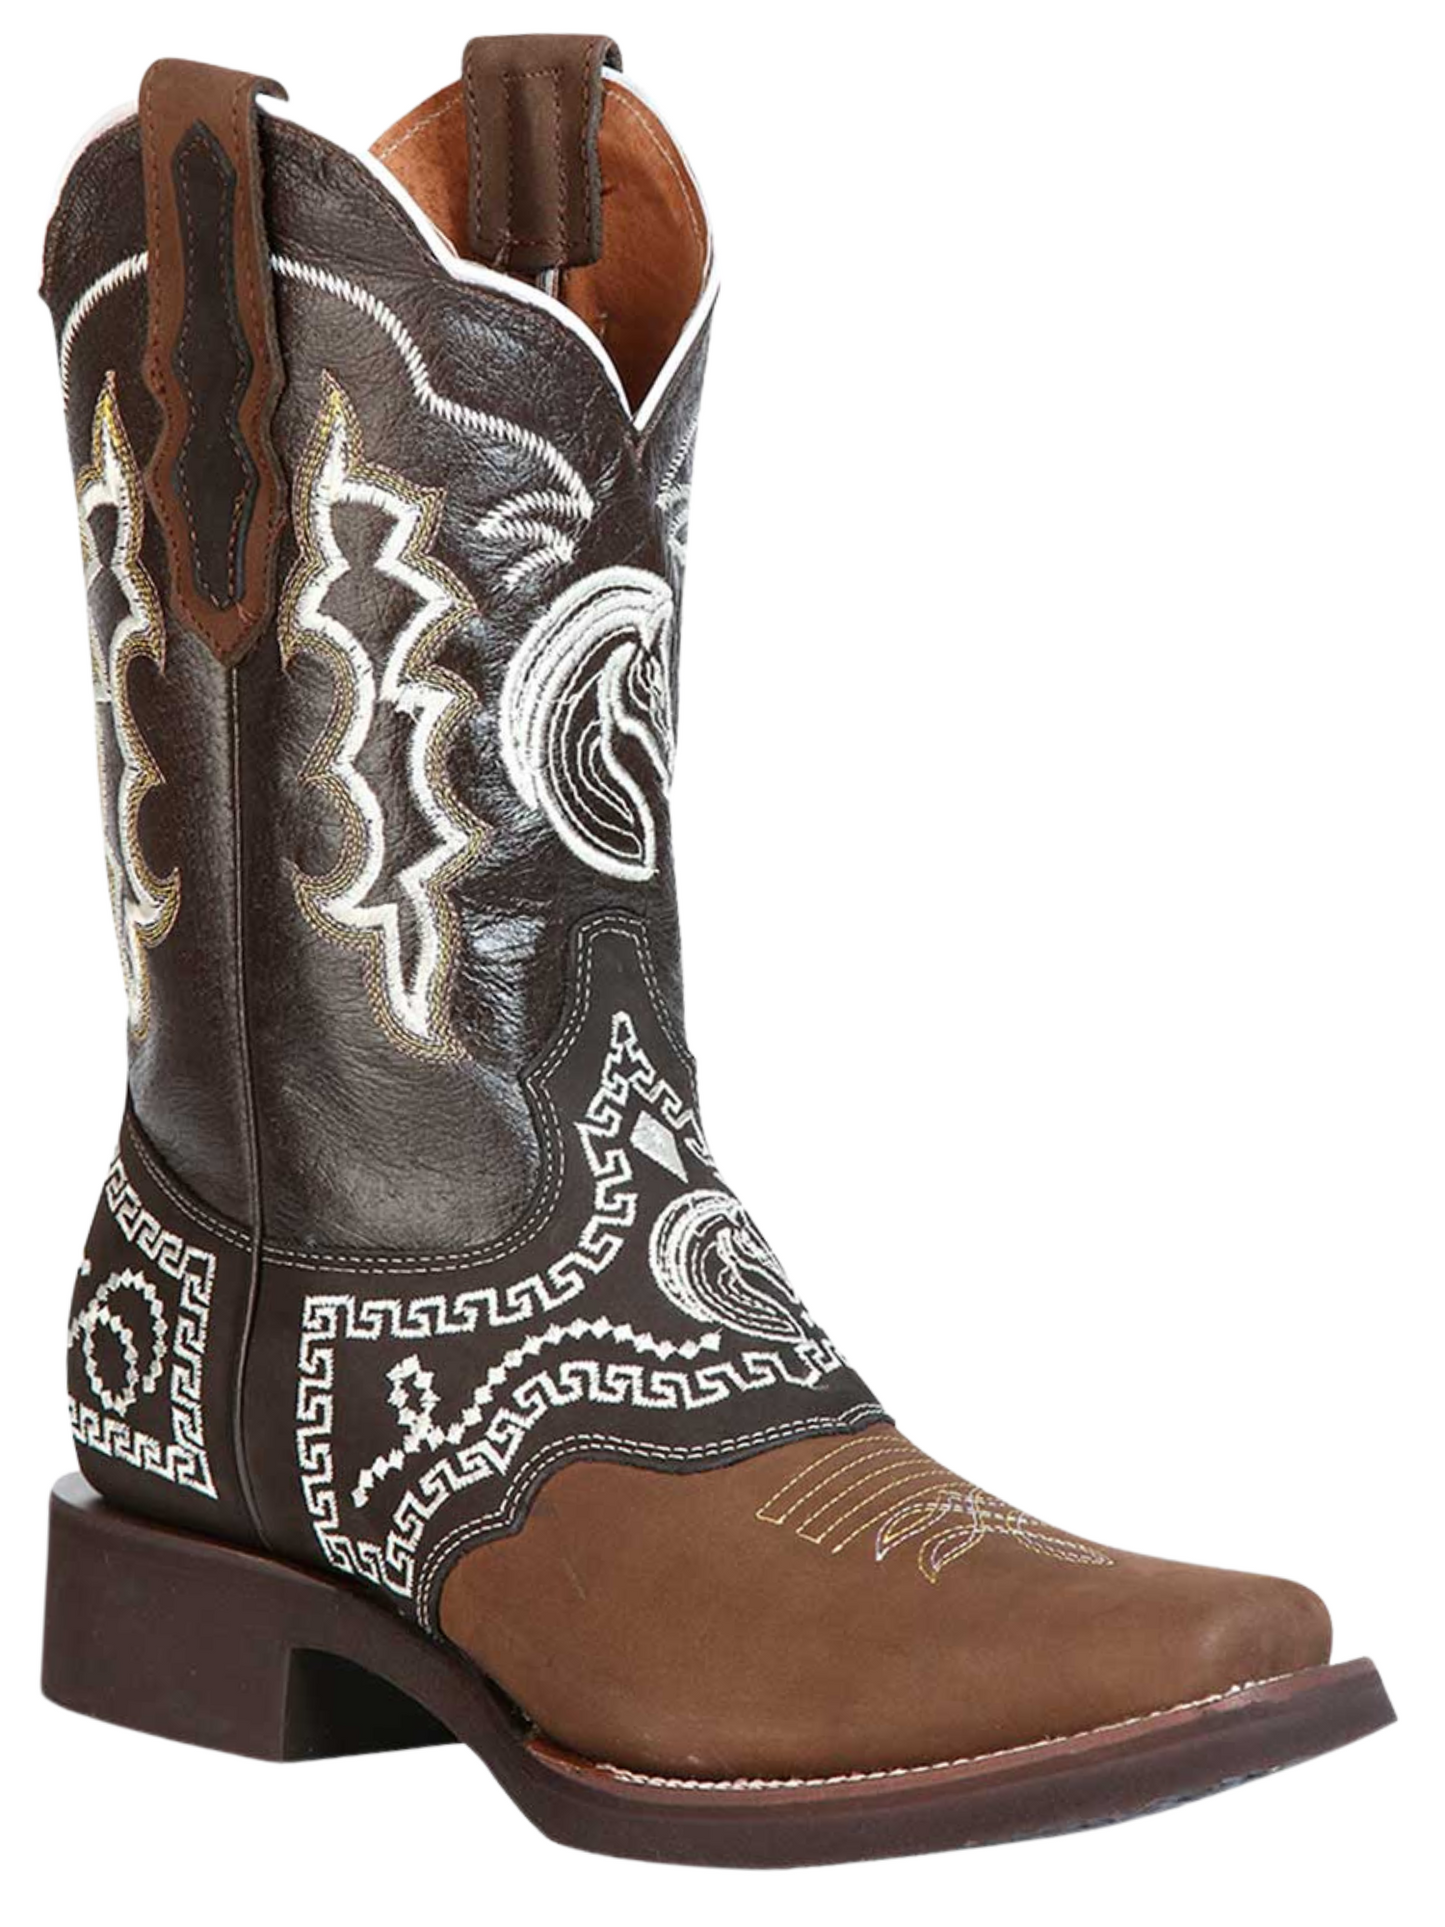 Rodeo Cowboy Boots with Embroidered Genuine Leather Mask for Men 'El General' - ID: 51117